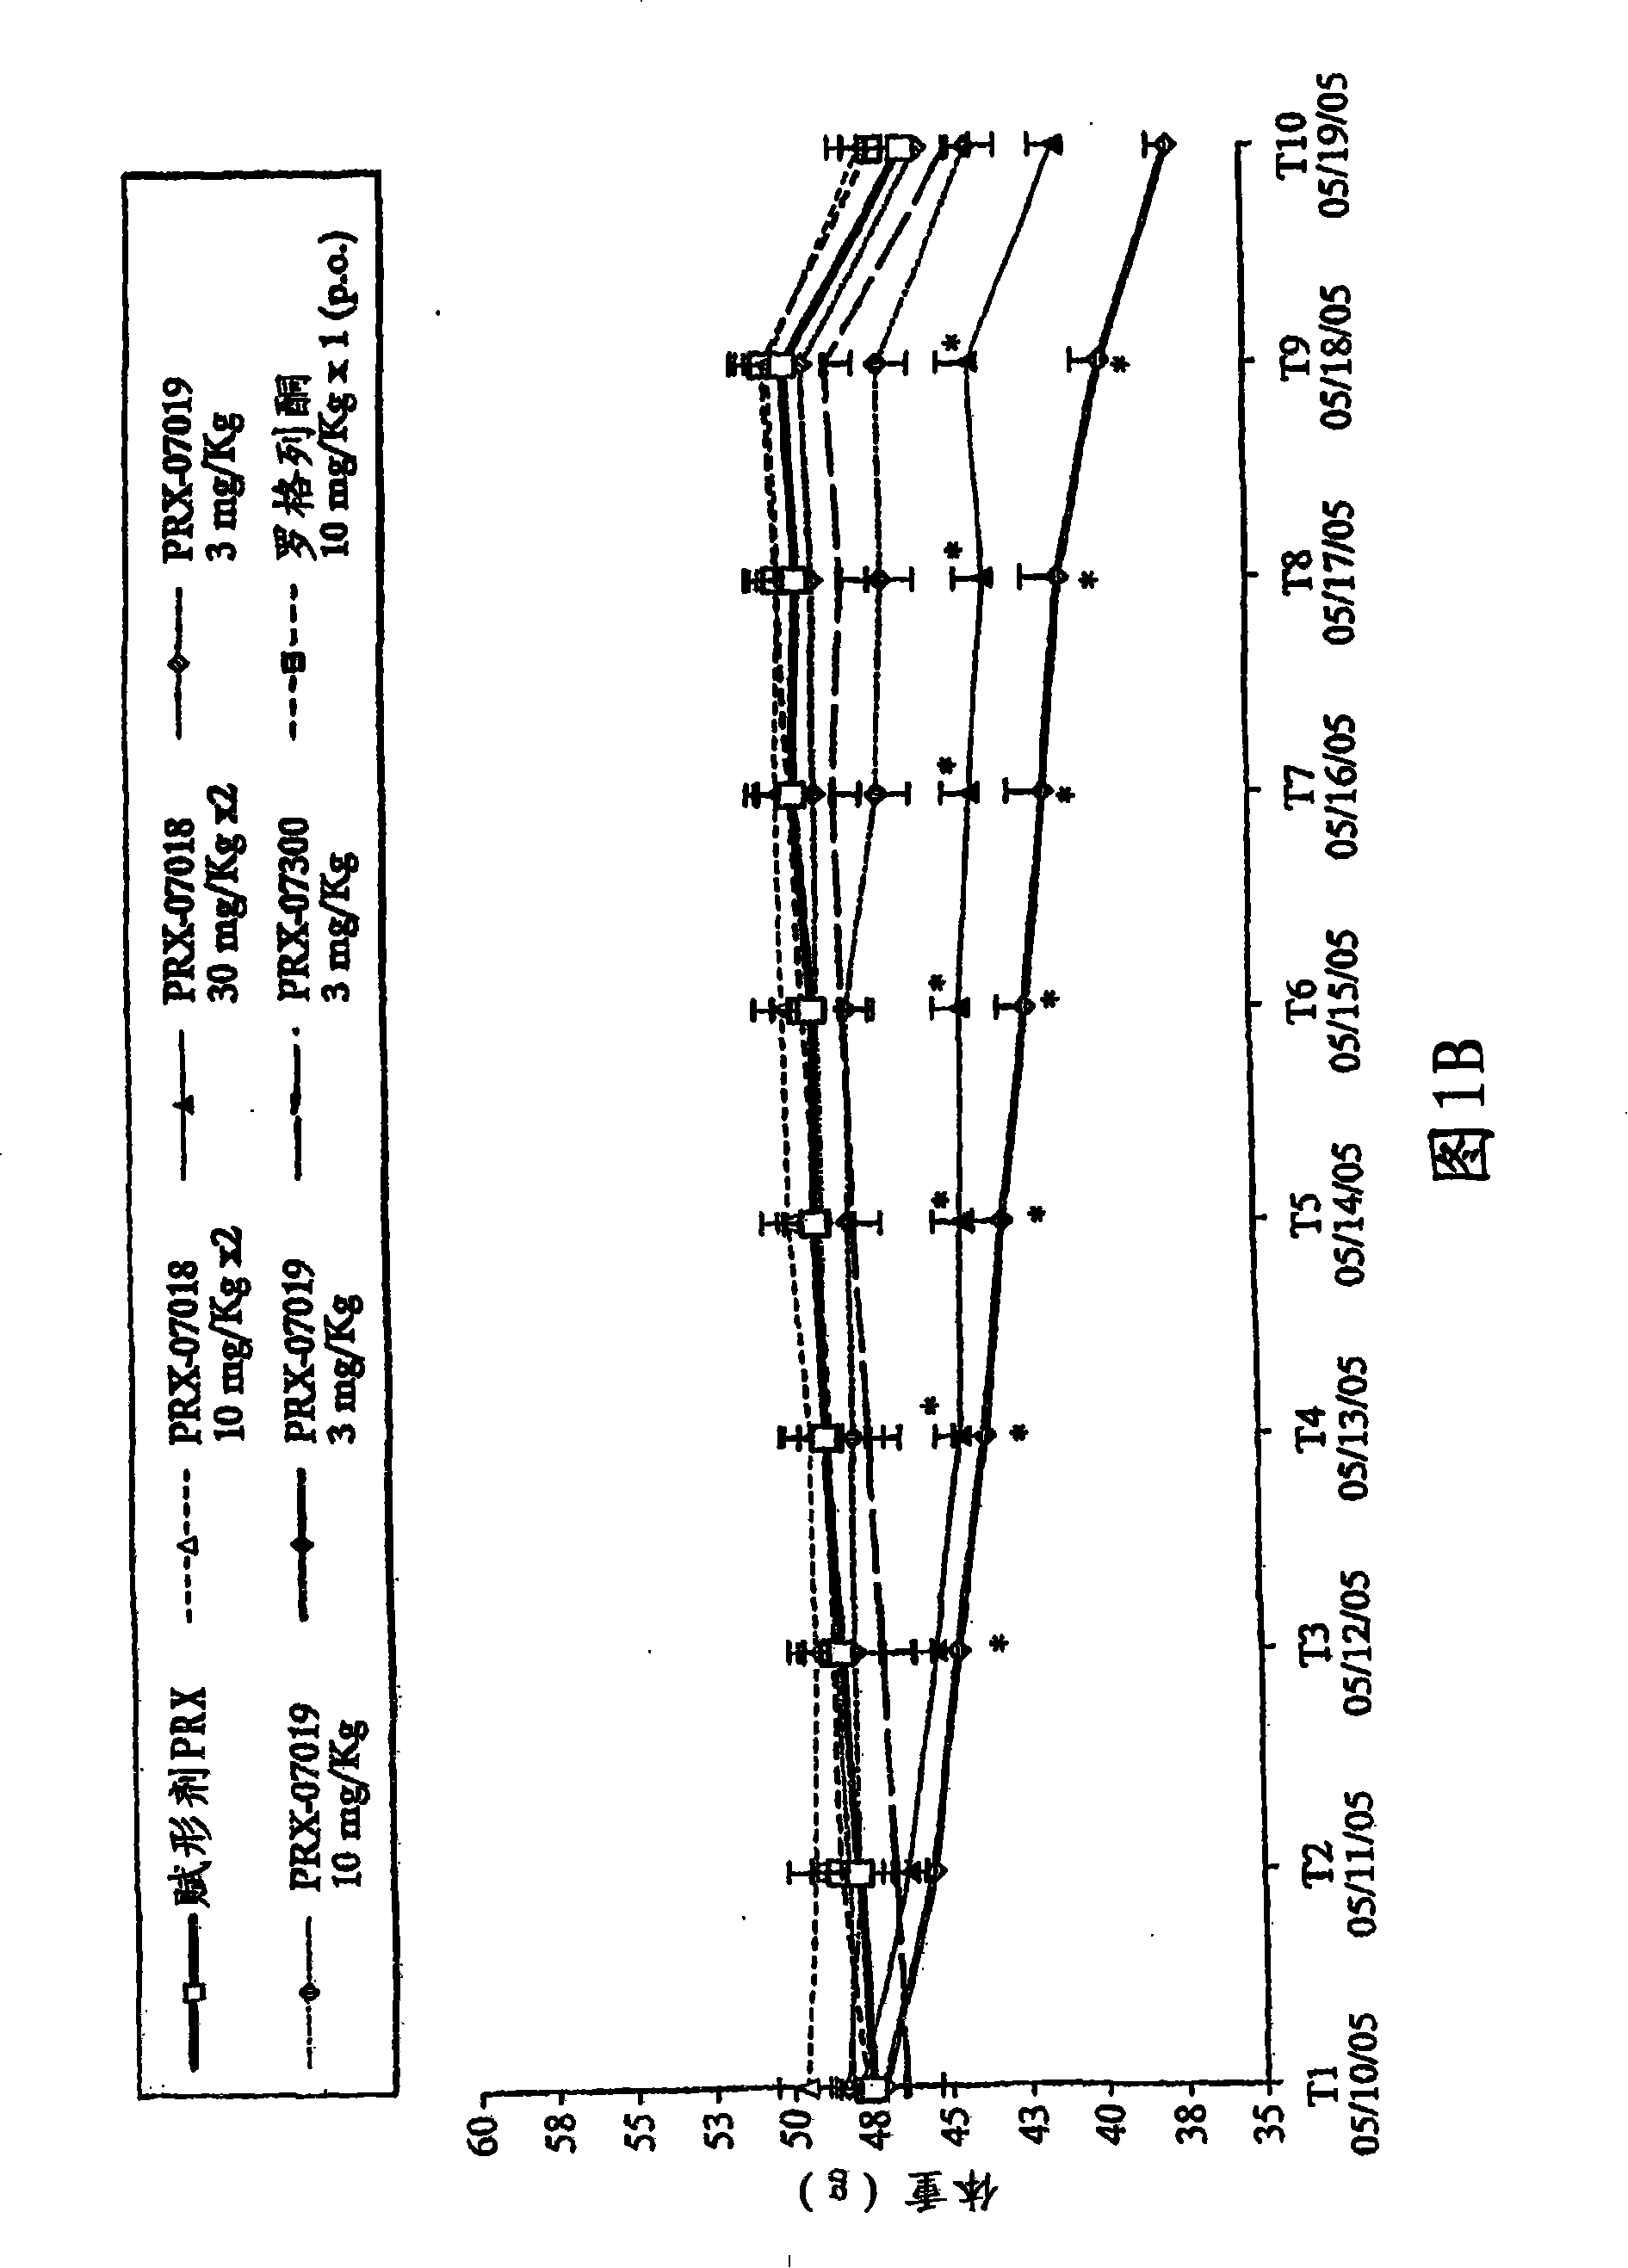 Substituted arylamine compounds and uses as 5-HT6 moderator thereof